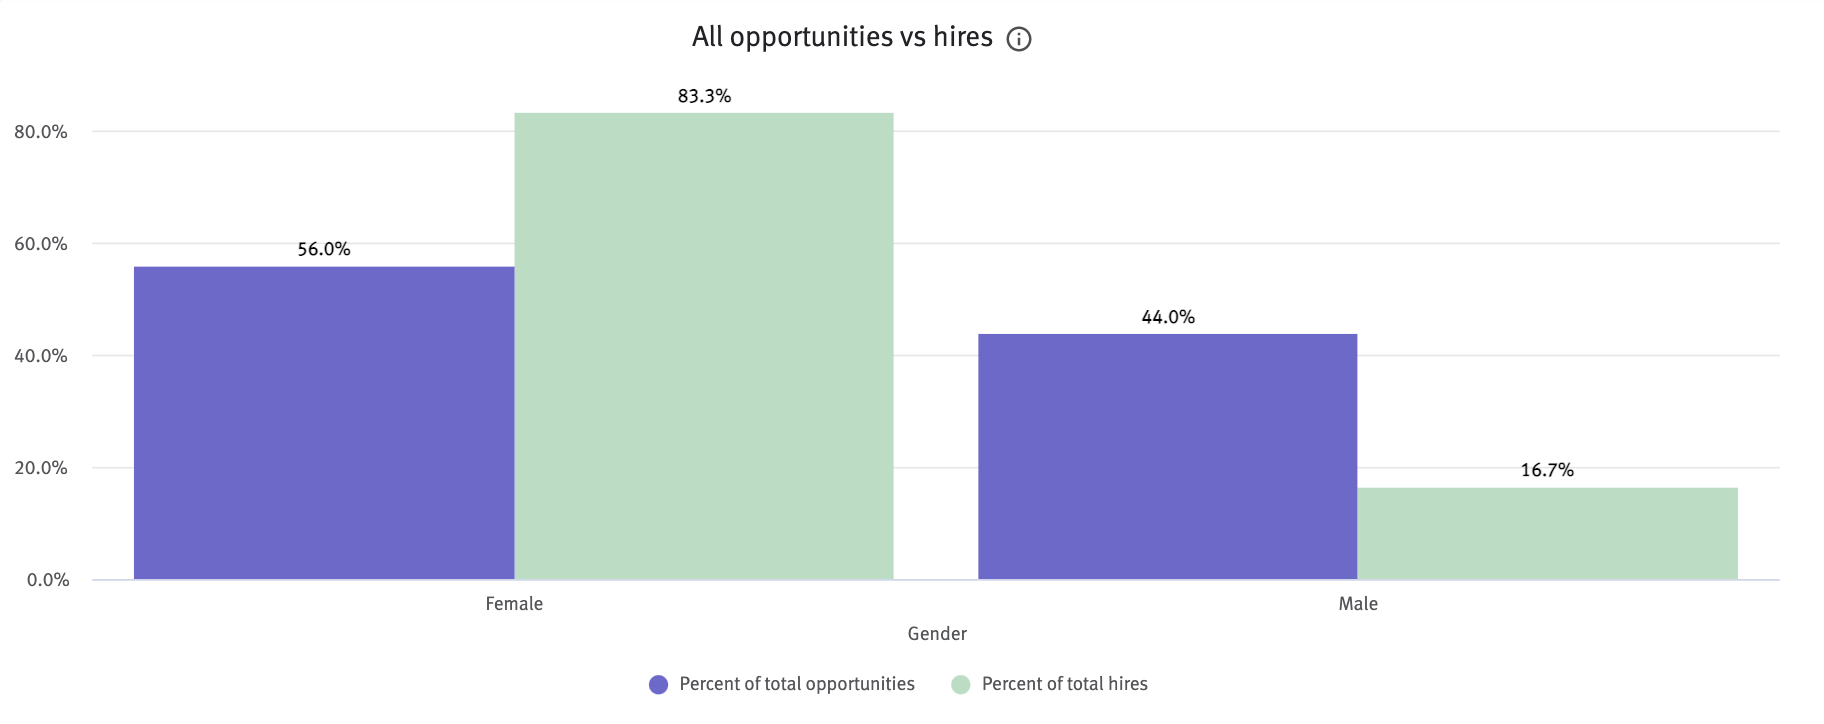 All opportunities vs hires chart